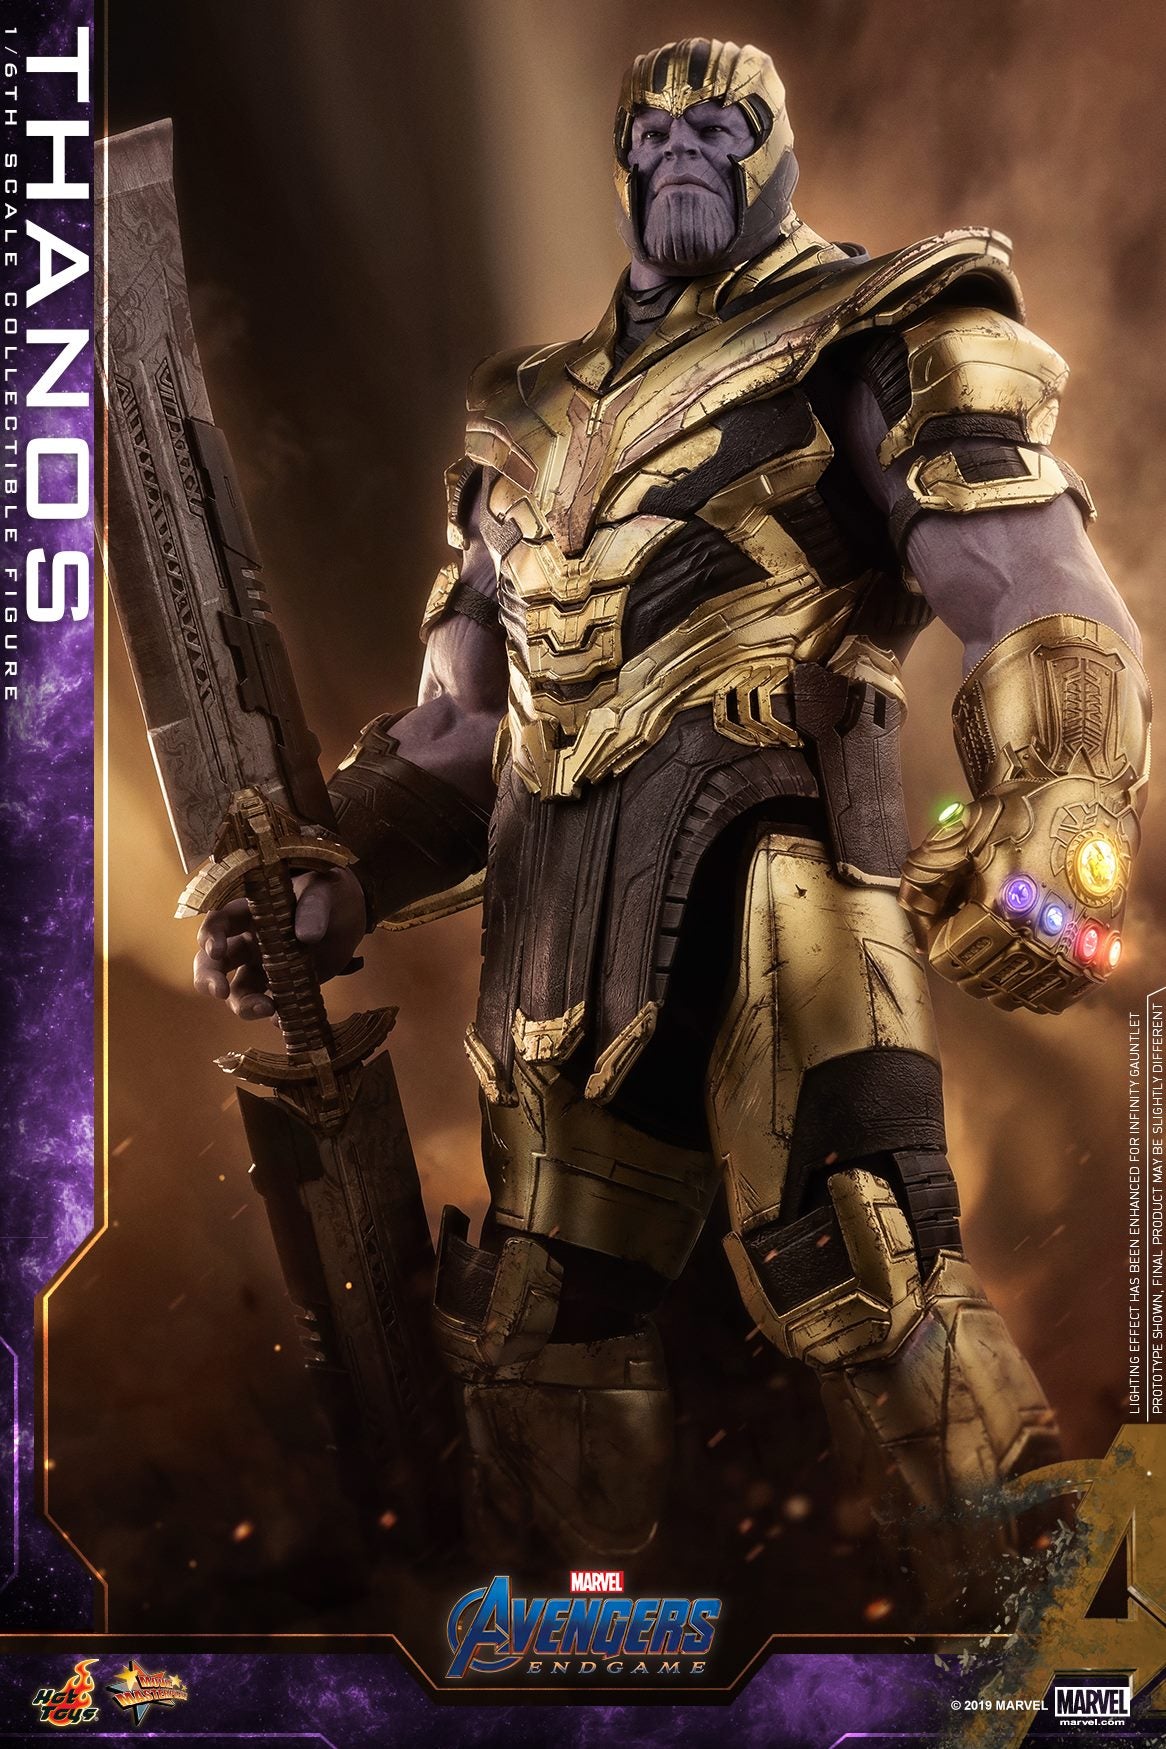 HOT TOYS MARVEL  AVENGERS ENDGAME THANOS COLLECTIBLE FIGURE 1/6TH SCALE - MMS529 - Anotoys Collectibles